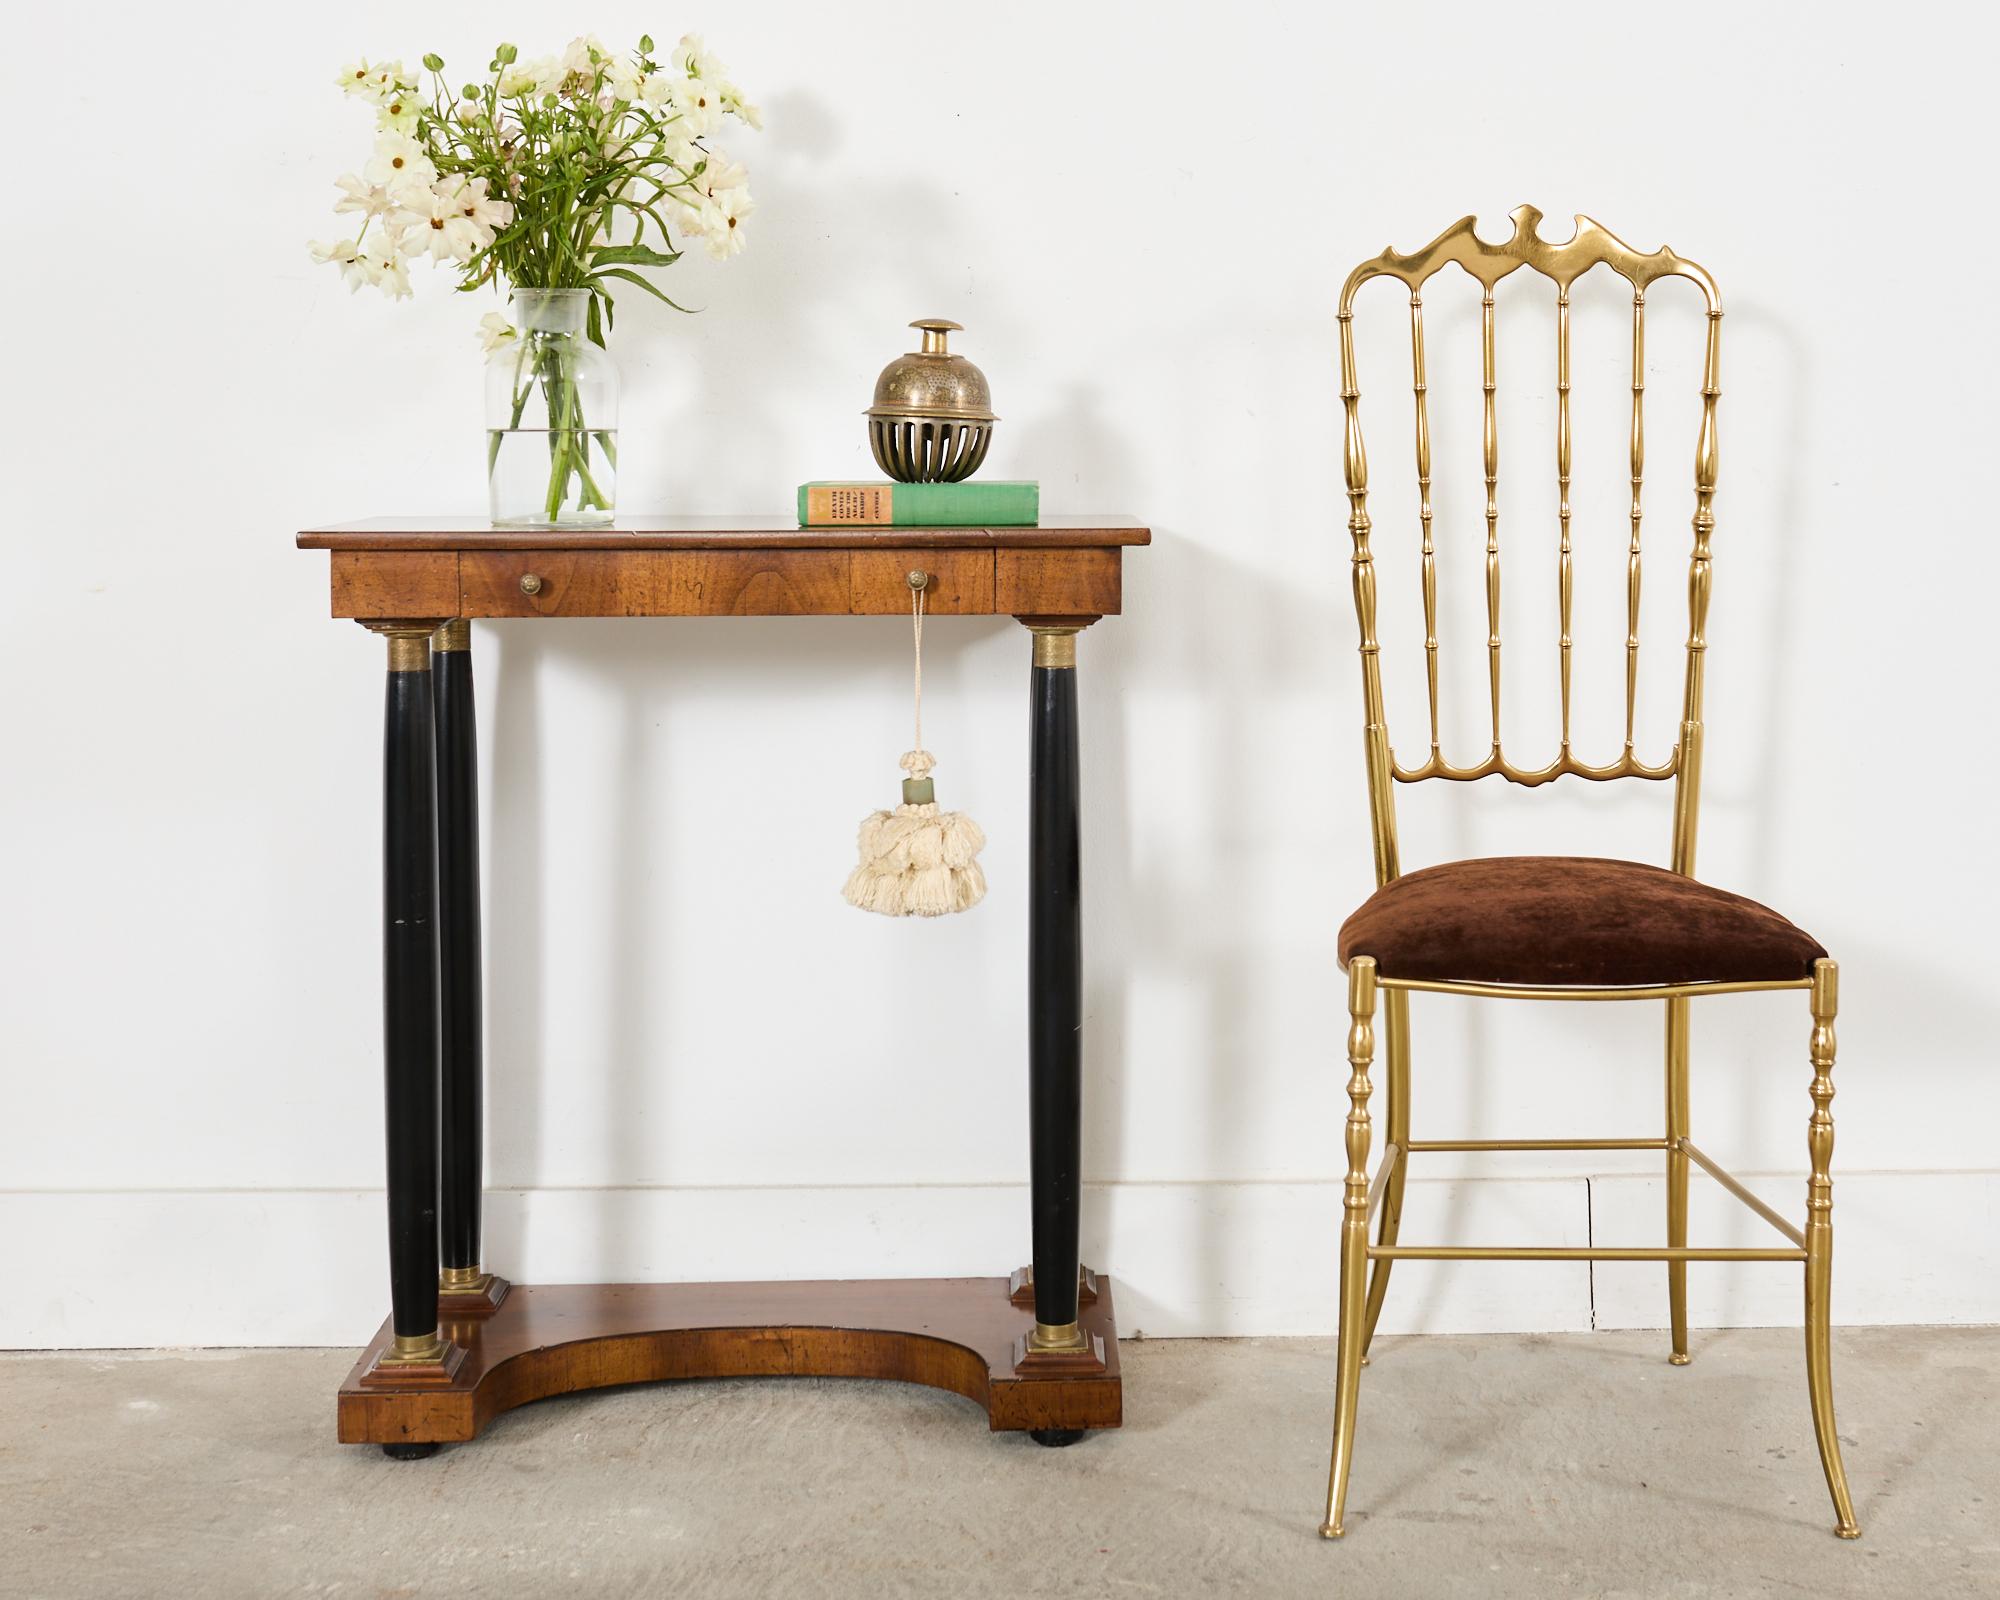 Distinctive French late 19th century pier table or console crafted from walnut. The diminutive table features ebonized column legs with patinated bronze mounts in the neoclassical or Napoleonic empire taste. The top of the case is fronted by a